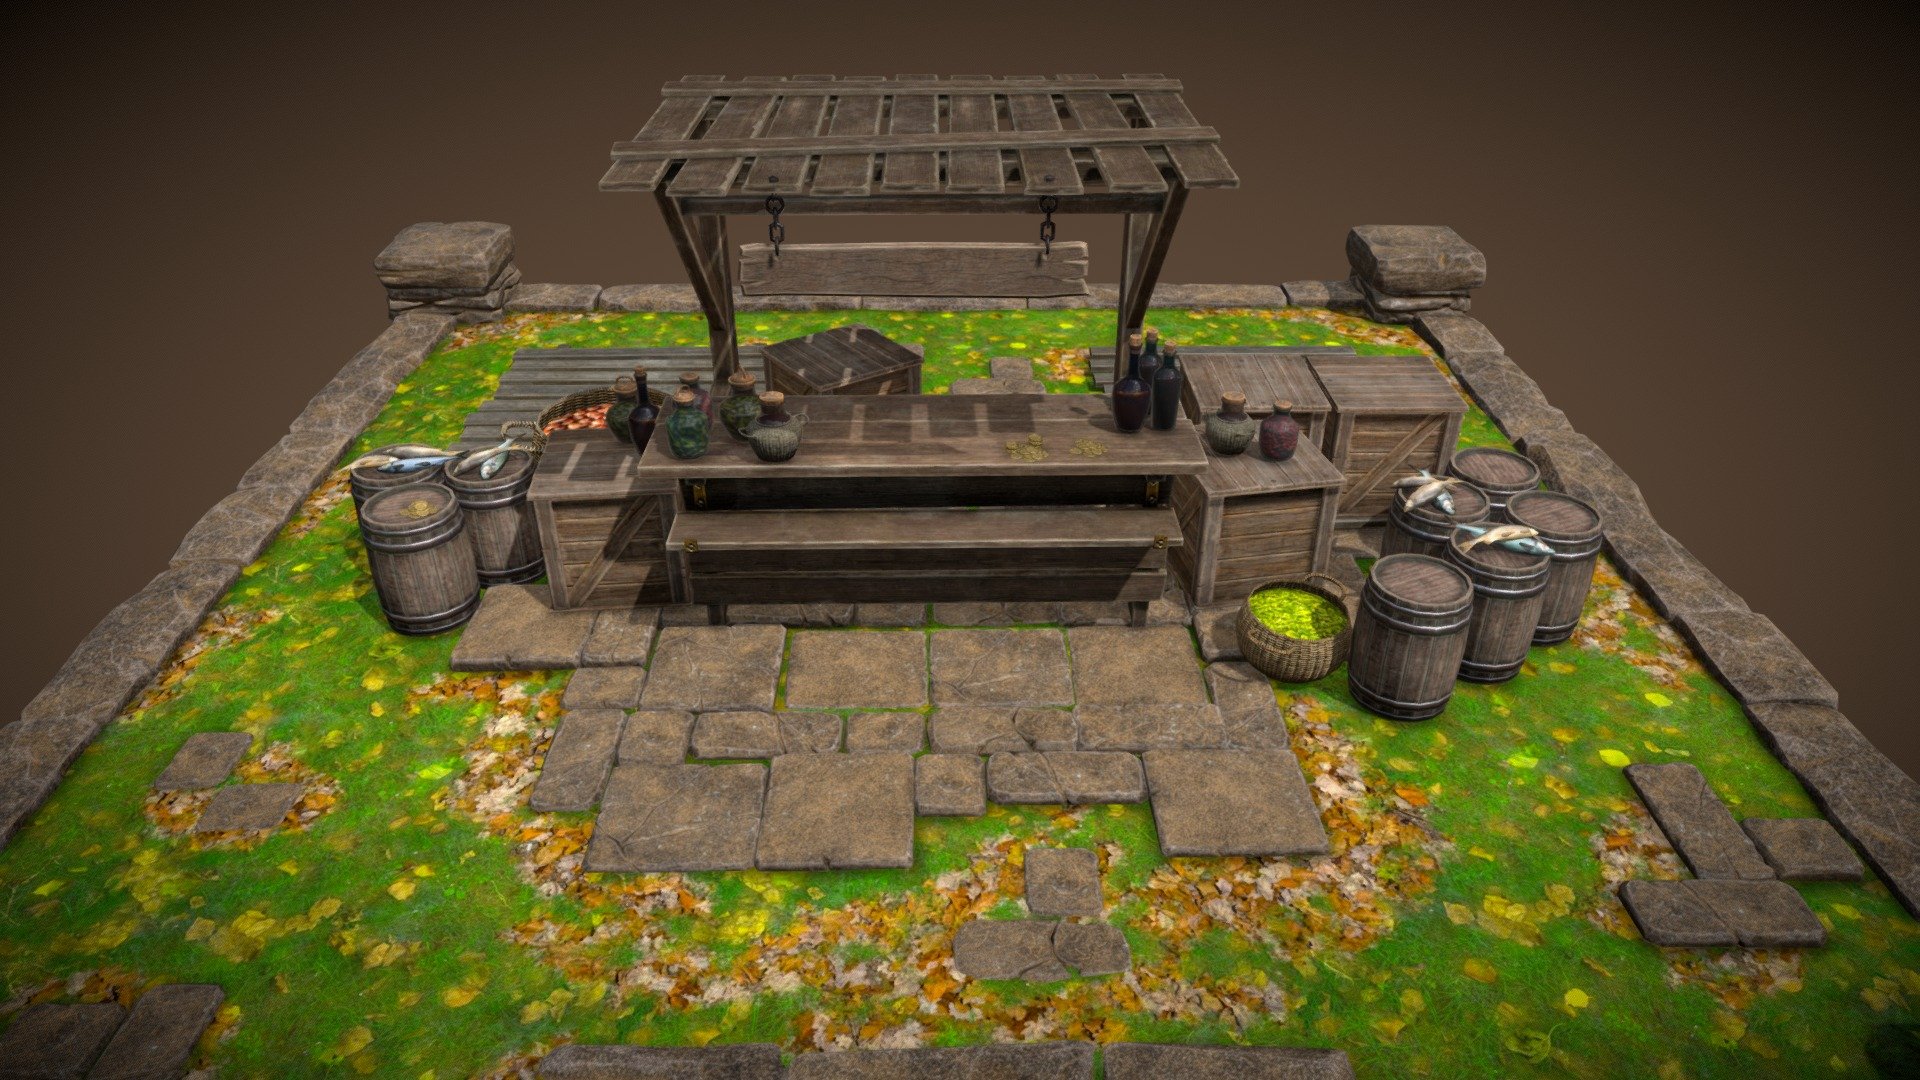 This asset is a collection of 3d models for creating a trading place in the world of your game. All models are presented as separate objects, so the scene can be disassembled and any items can be used separately. All objects have pbr-textures 2k 3d model